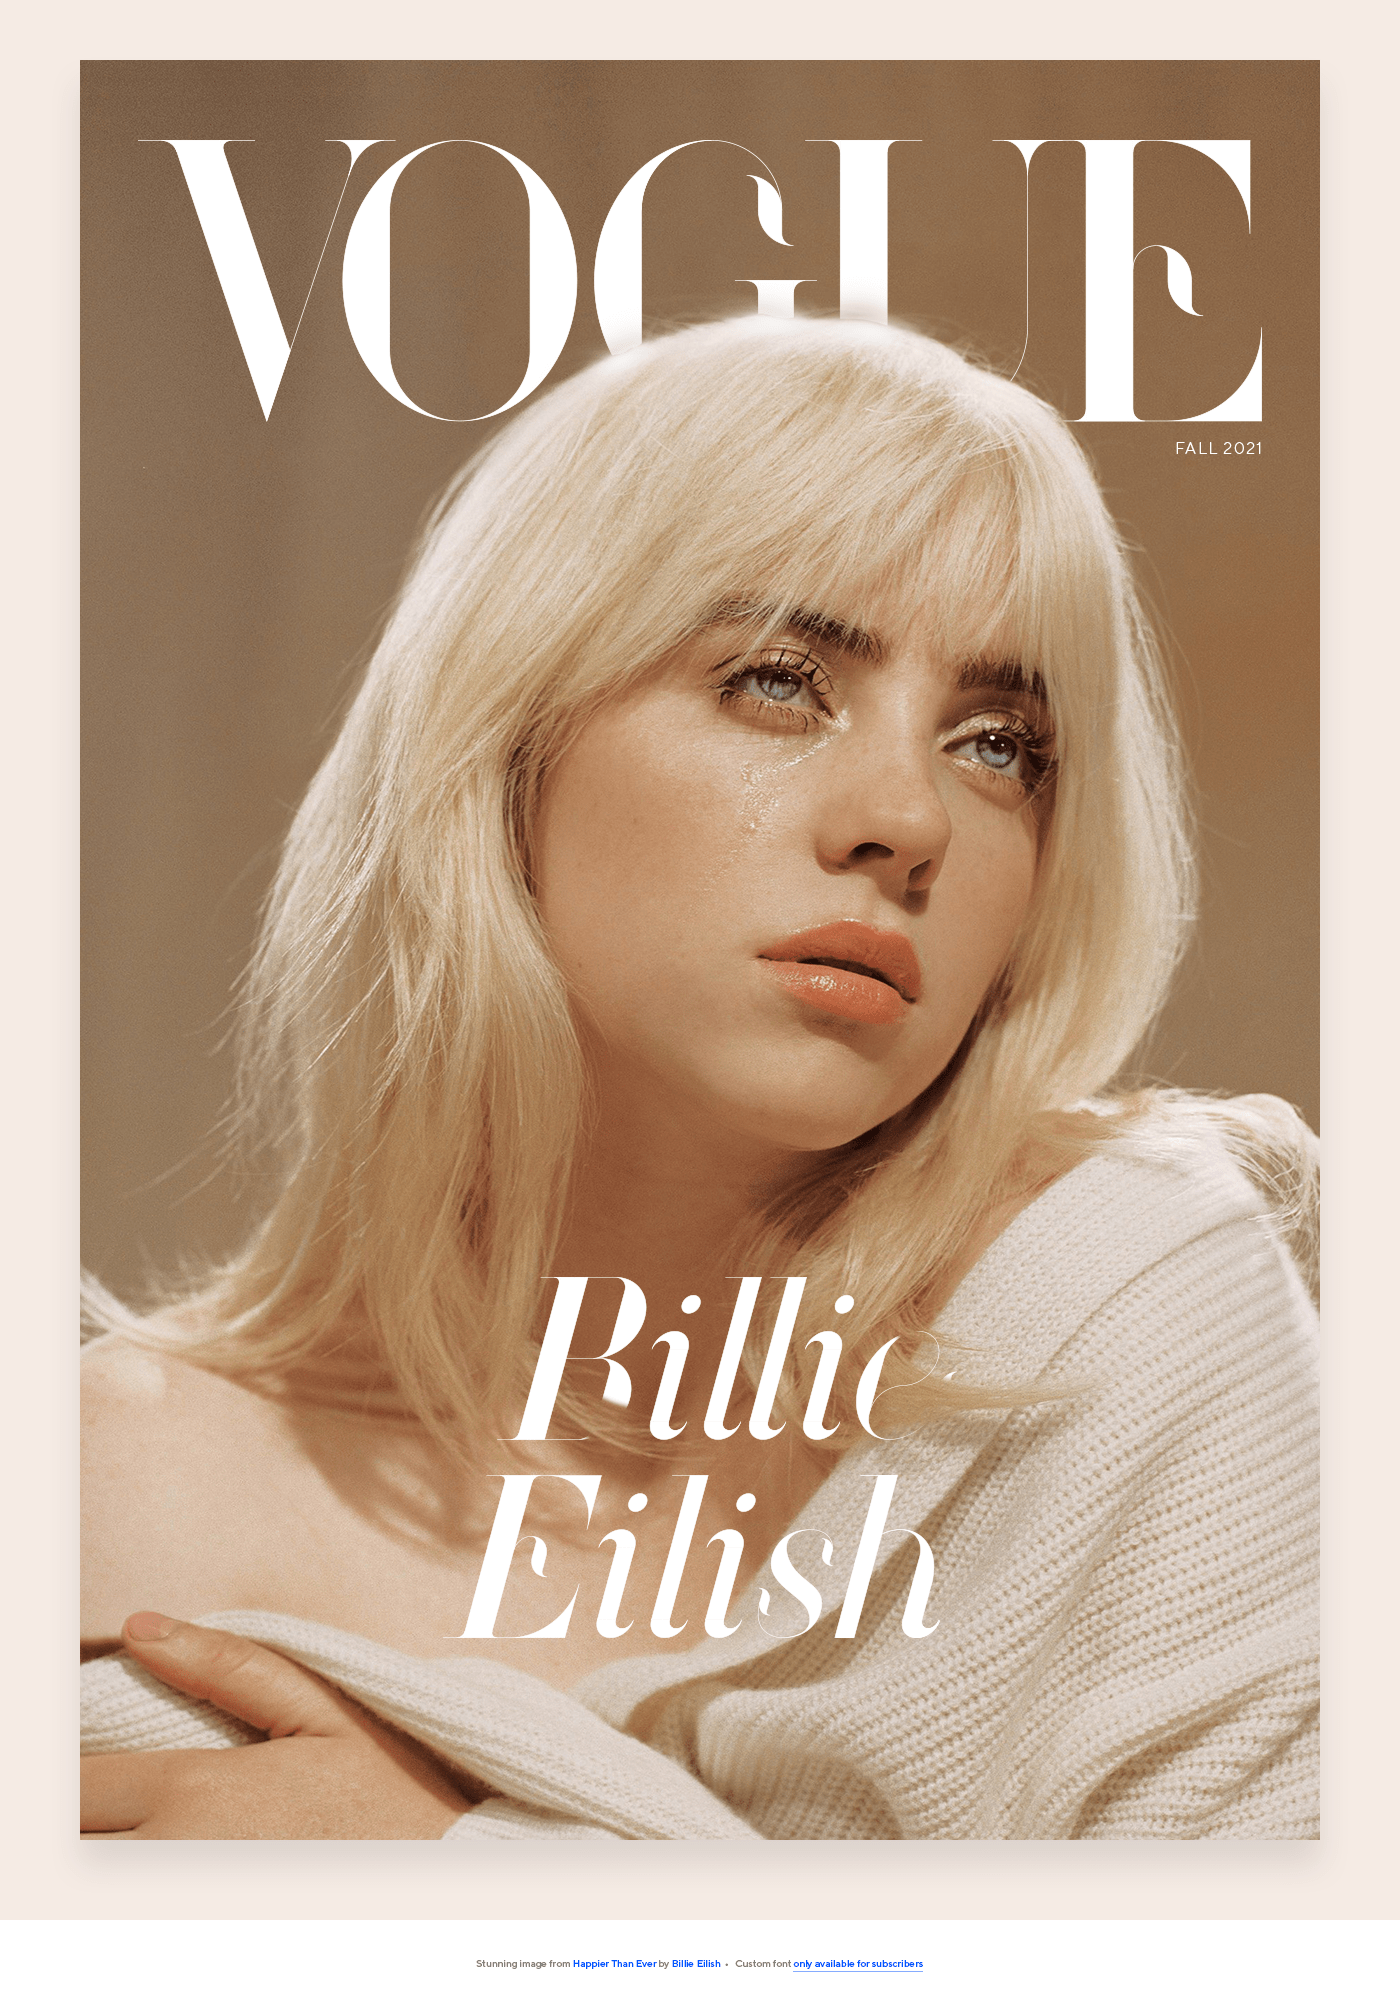 Fictive cover for the VOGUE magzine featuring Billie Eilish and using the LEA Typeface.